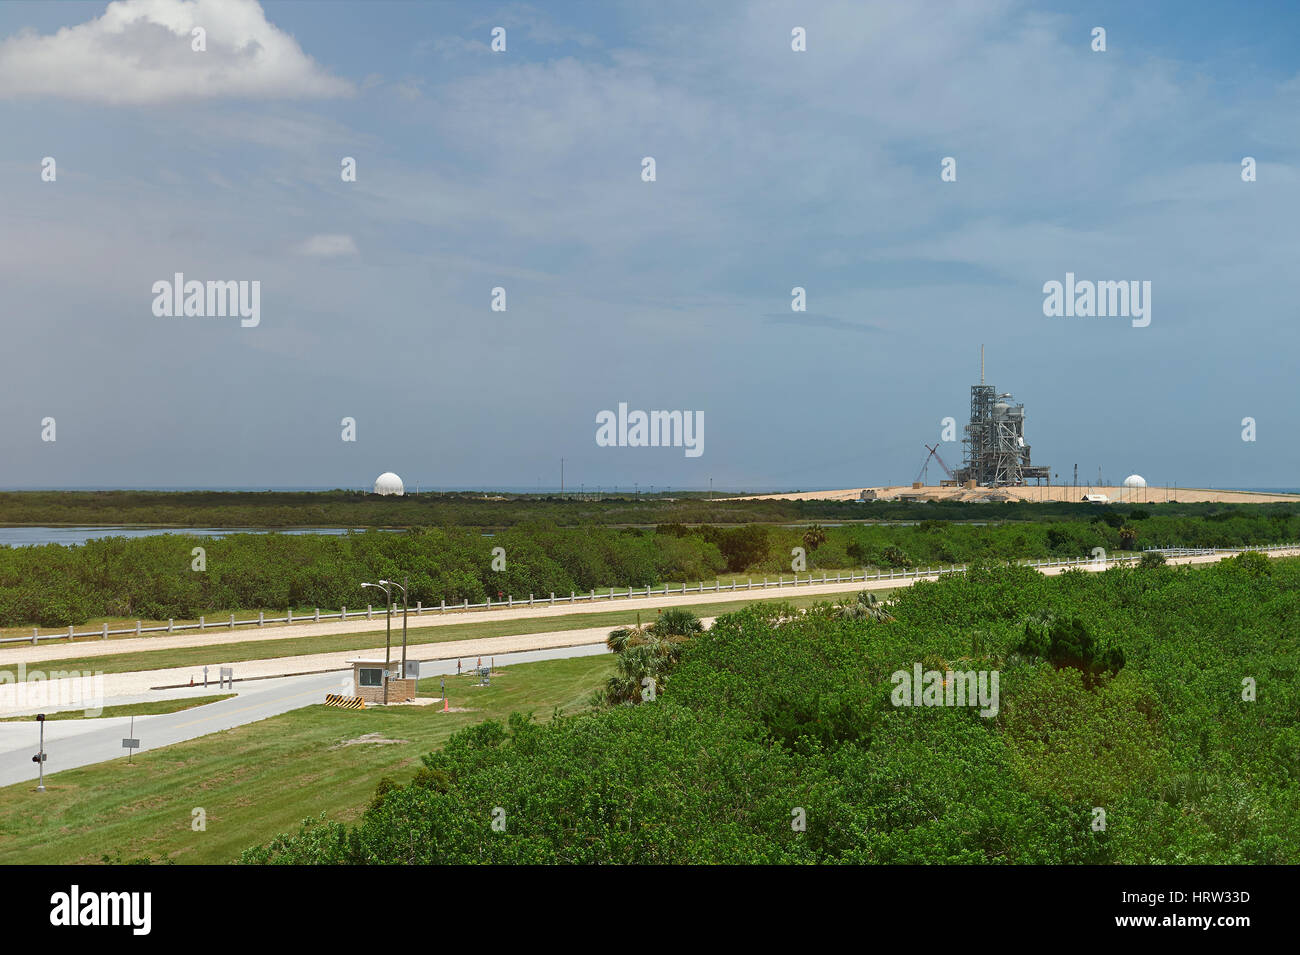 Startrampe für Space Shuttle in Cape Canaveral Mitte. Panoramablick auf Cape Canaveral station Stockfoto